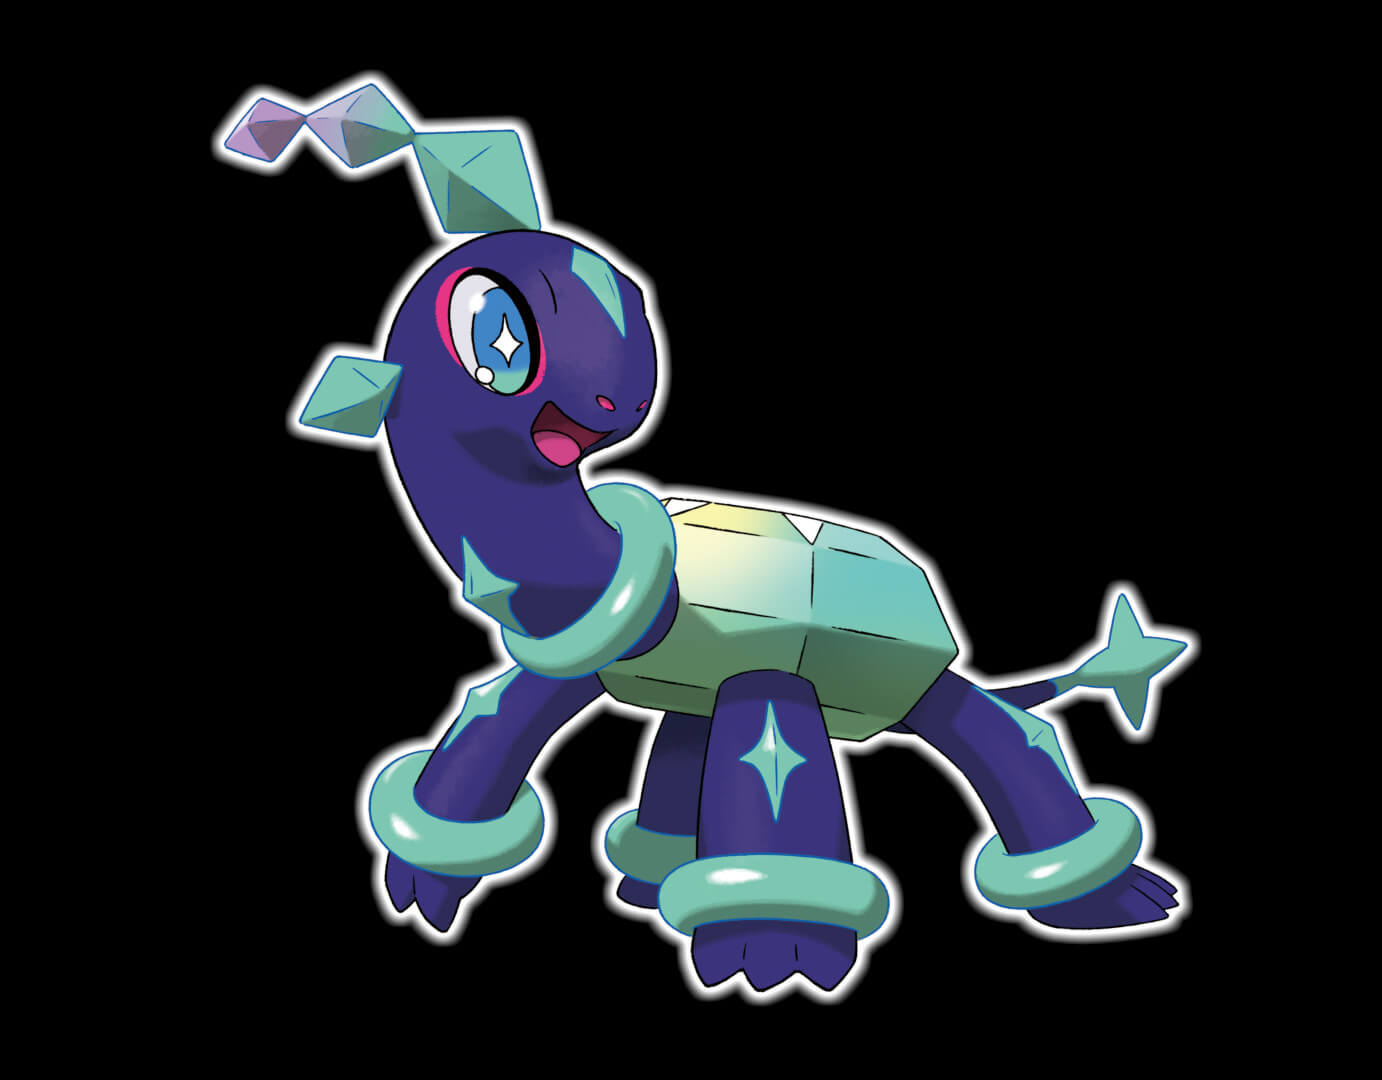 Artwork for the new mysterious turtle Pokemon revealed as part of the upcoming Pokemon Scarlet and Violet DLC